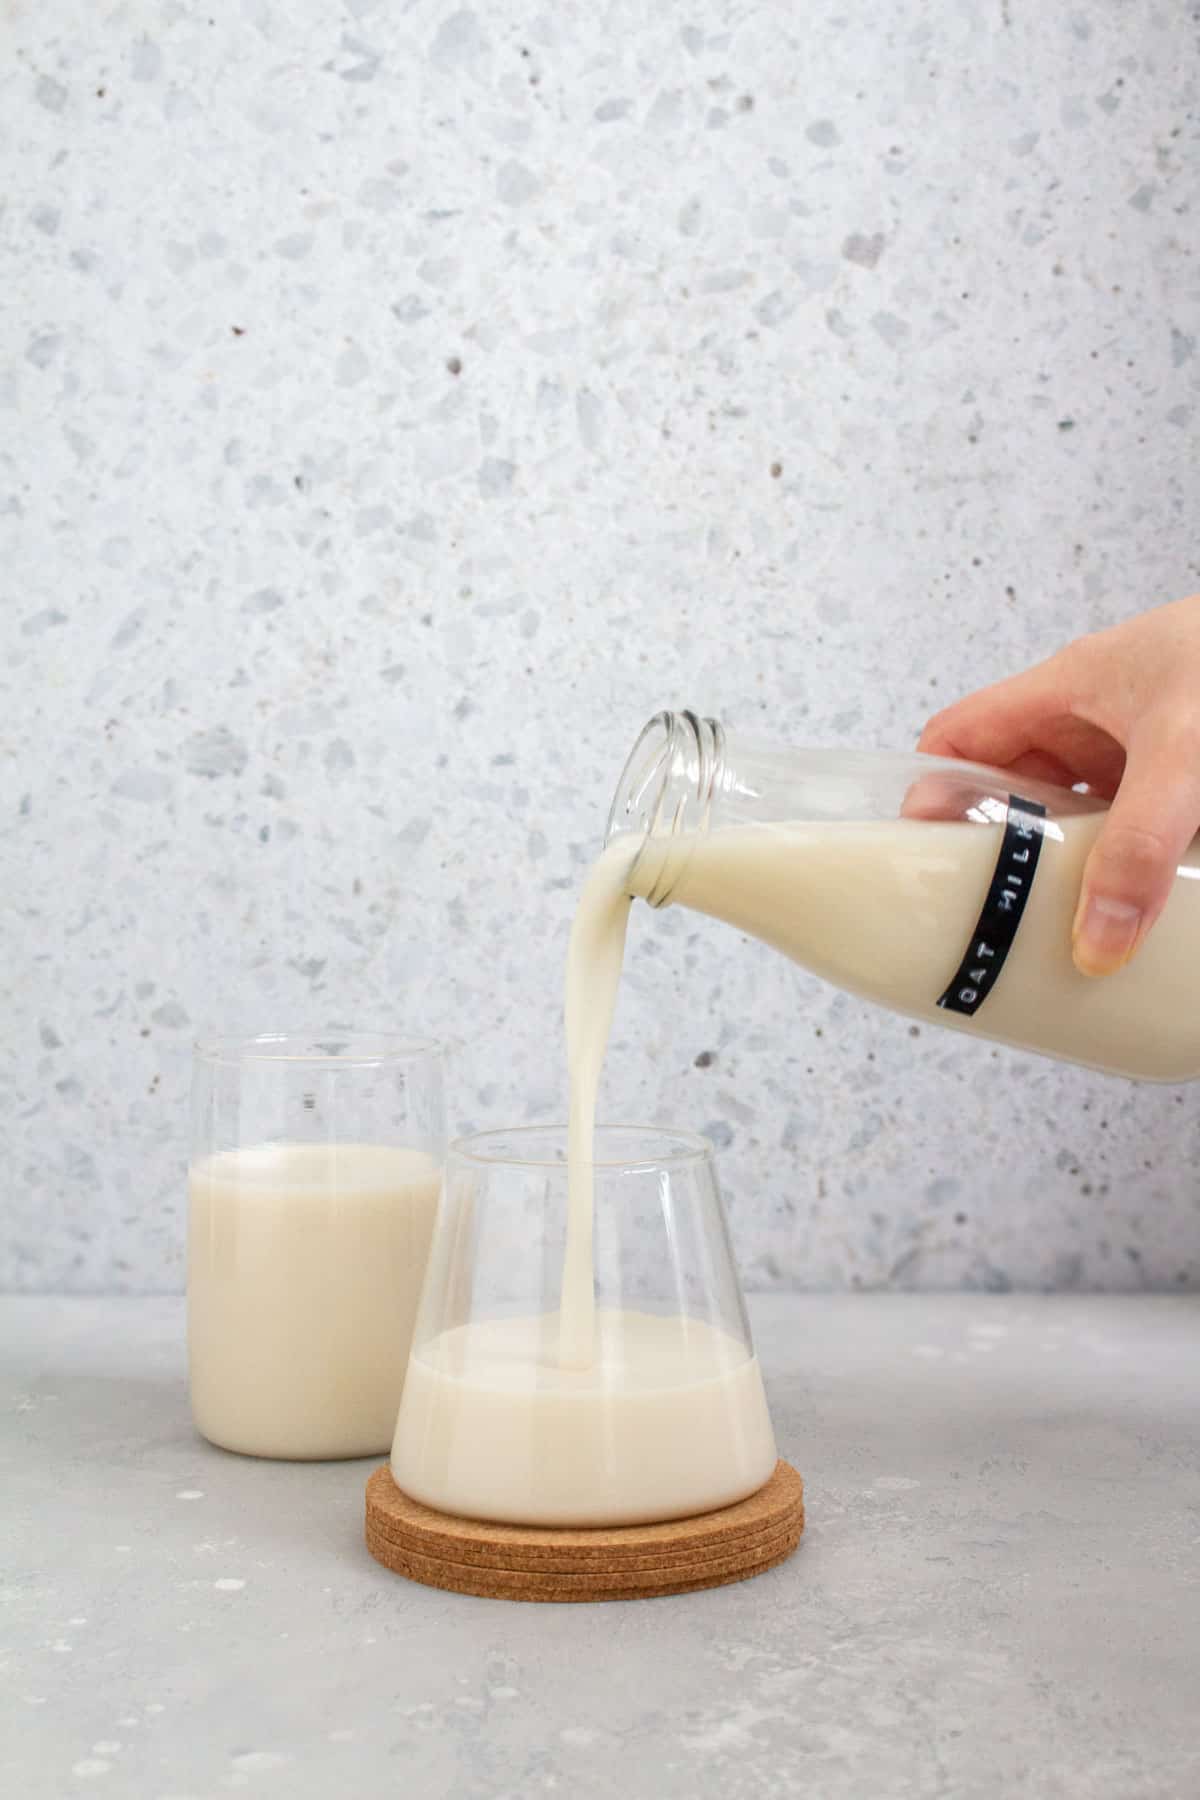 A bottle of oat milk poured into a glass.